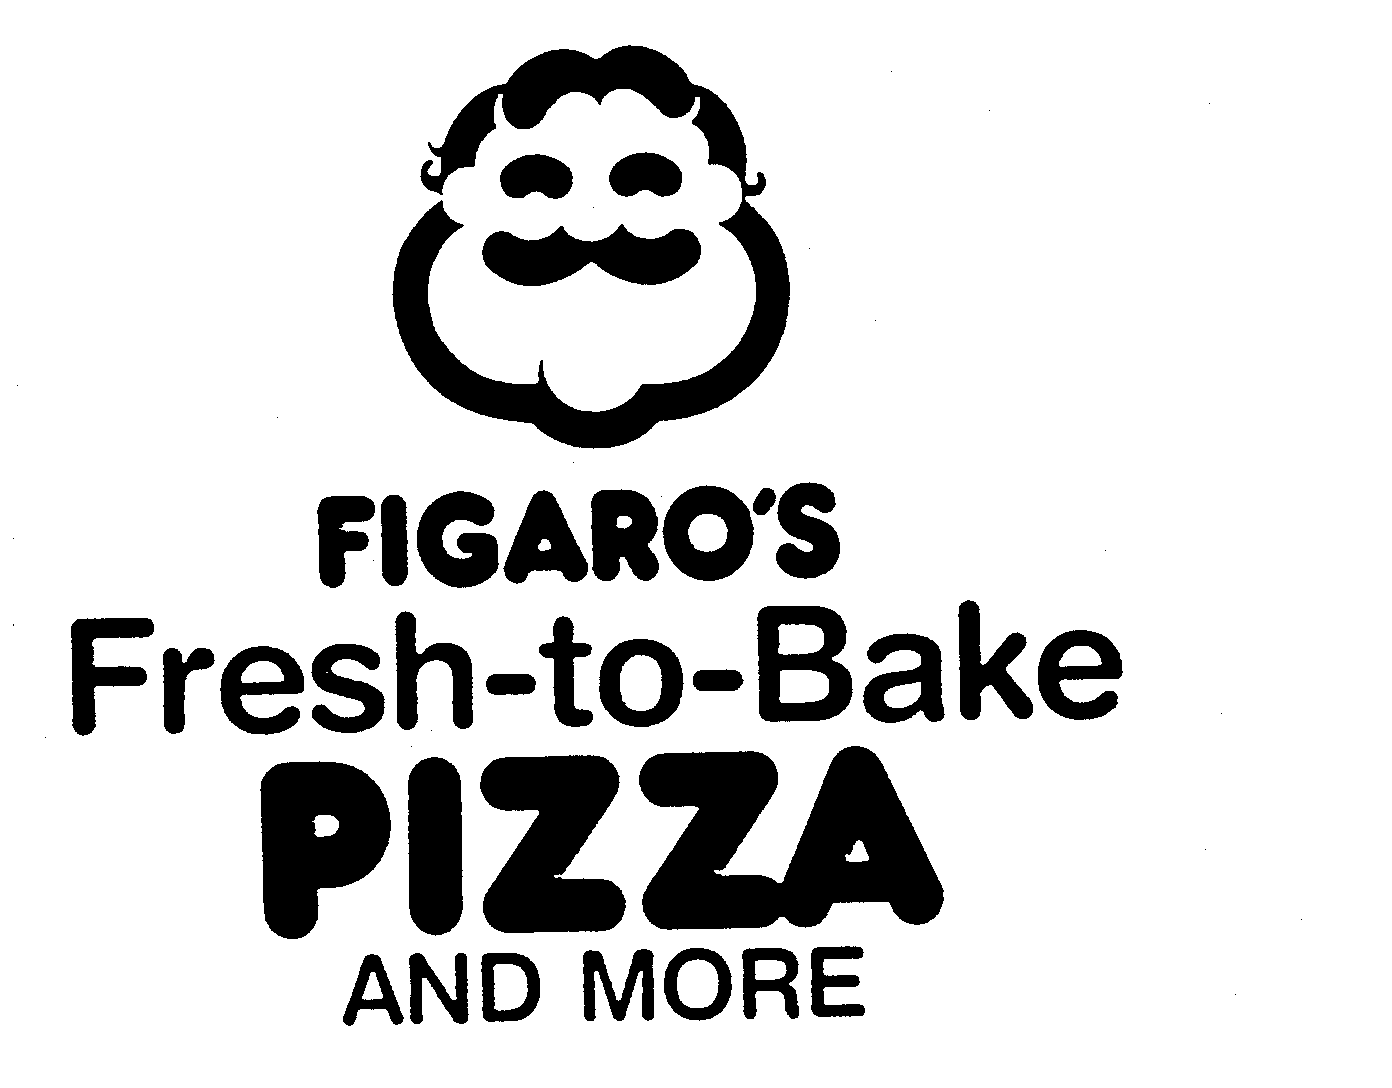  FIGARO'S FRESH-TO-BAKE PIZZA AND MORE